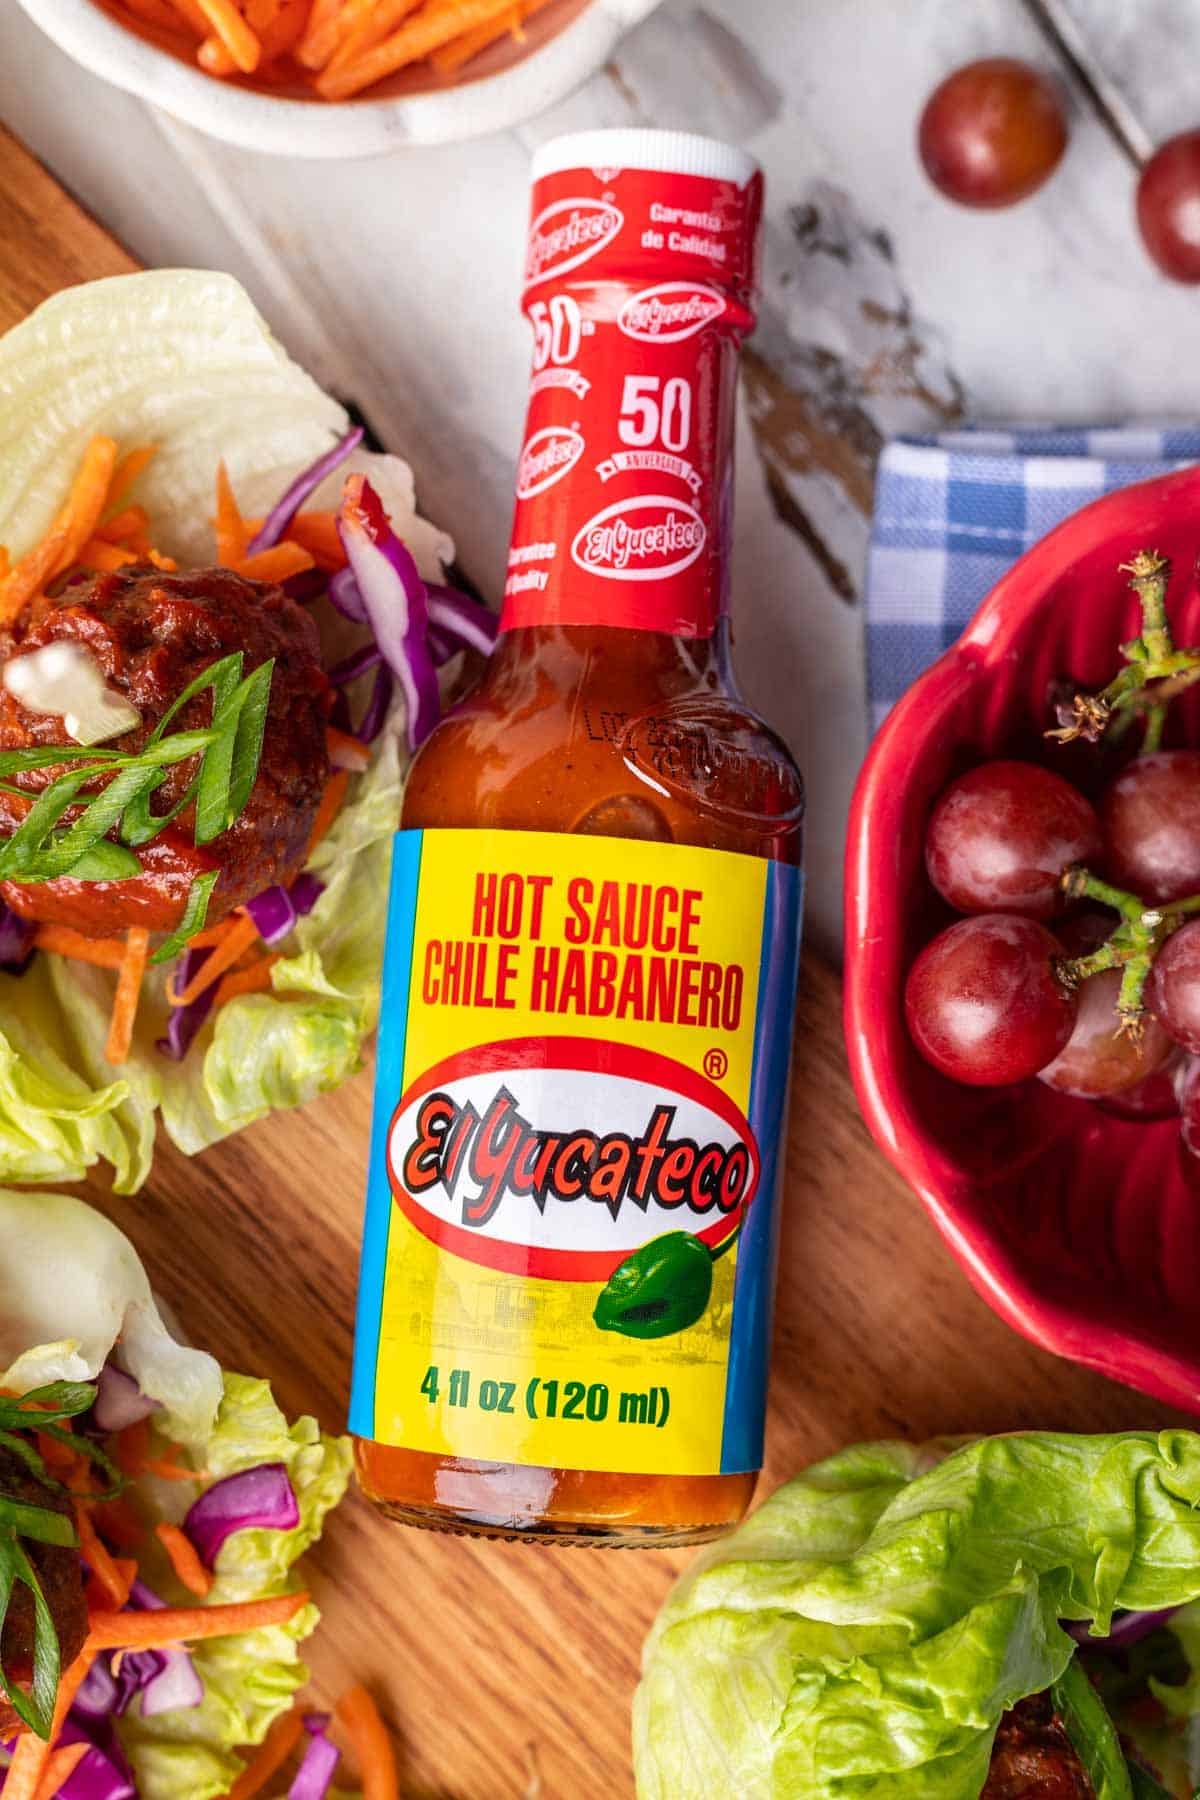 El Yucateco Chile Habanero hot sauce surrounded by spicy meatballs in lettuce cups.